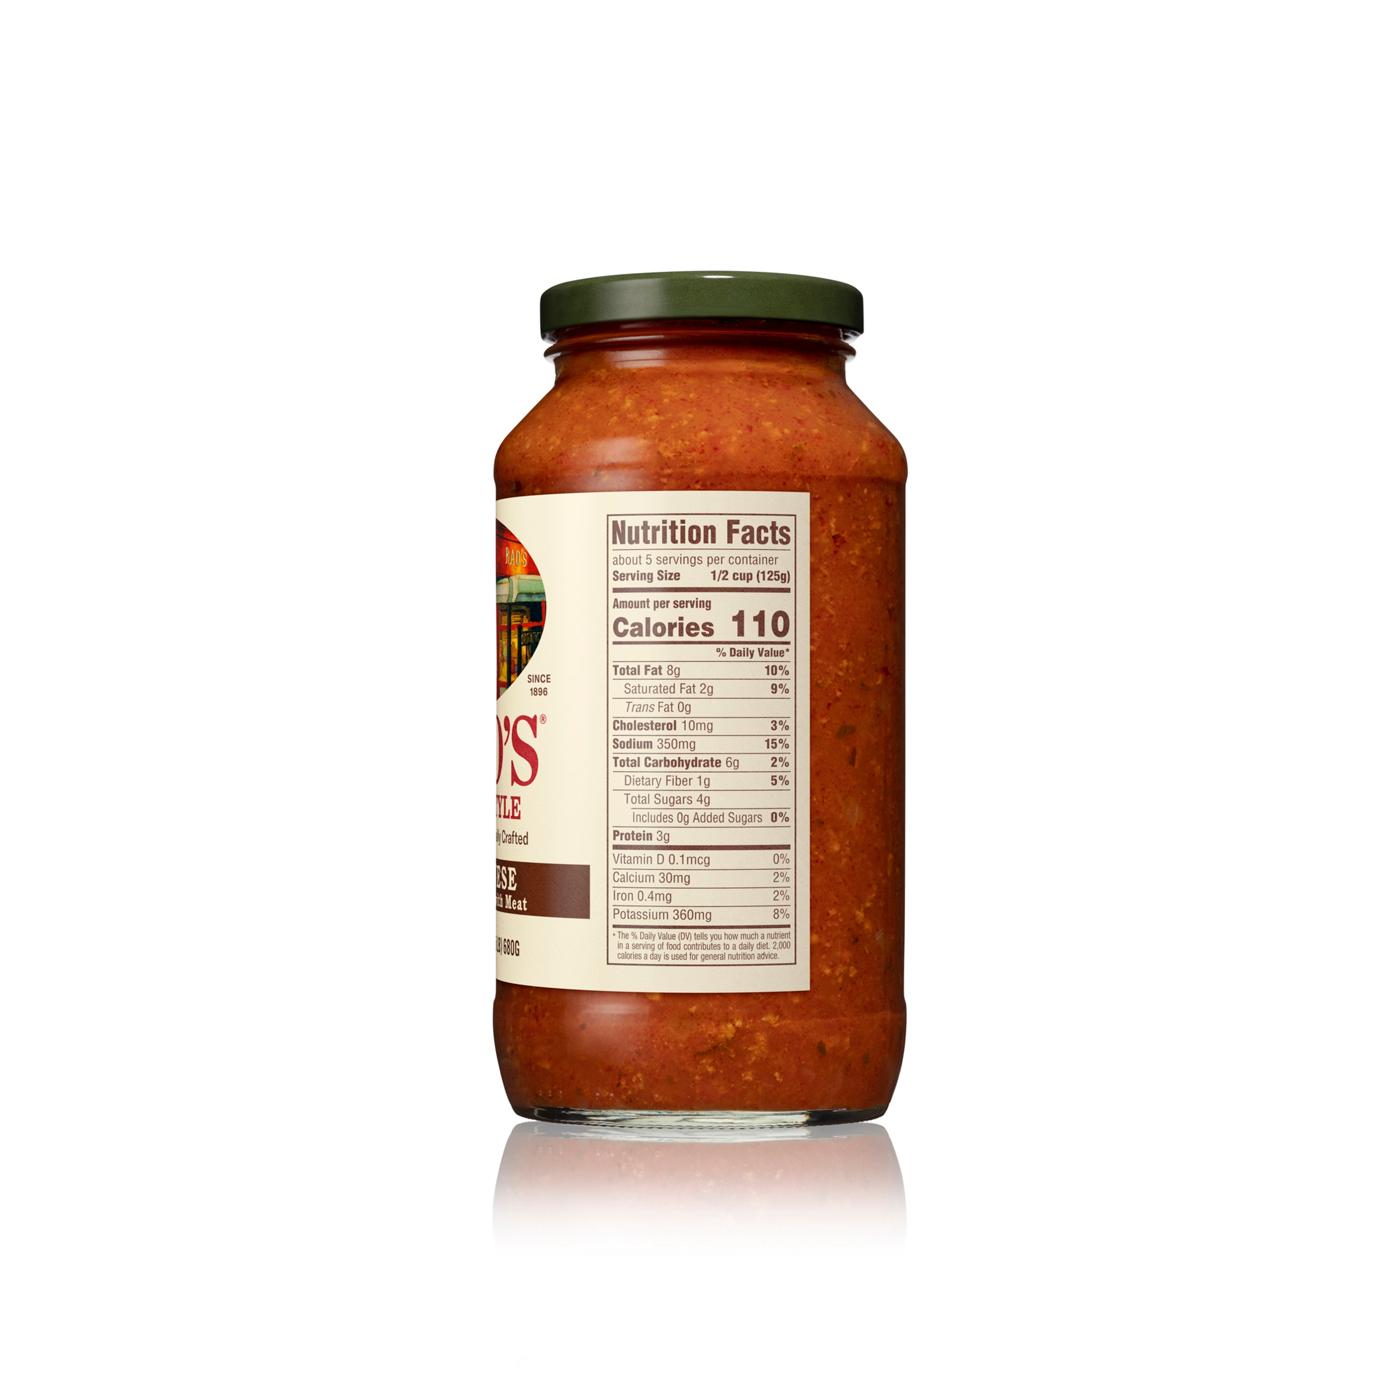 Rao's Homestyle Bolognese Sauce; image 4 of 5